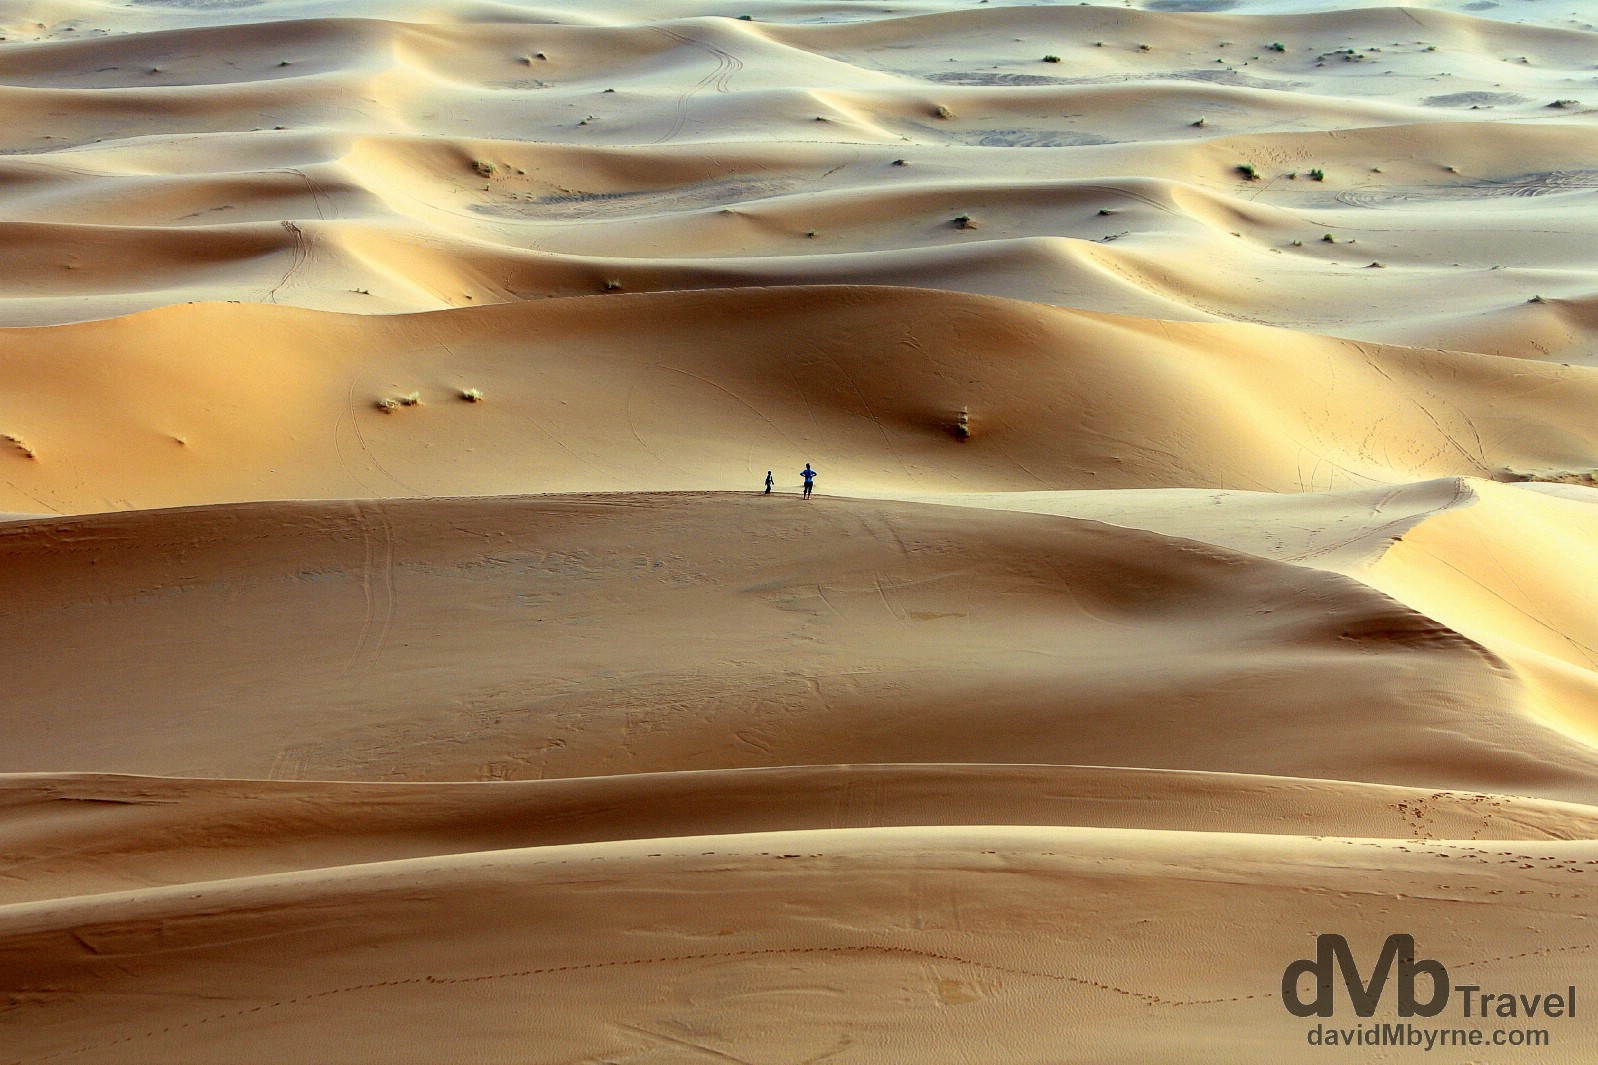 Walking on the sand dunes of Erg Chebbi outside the village of Merzouga, Morocco. May 19th, 2014. 